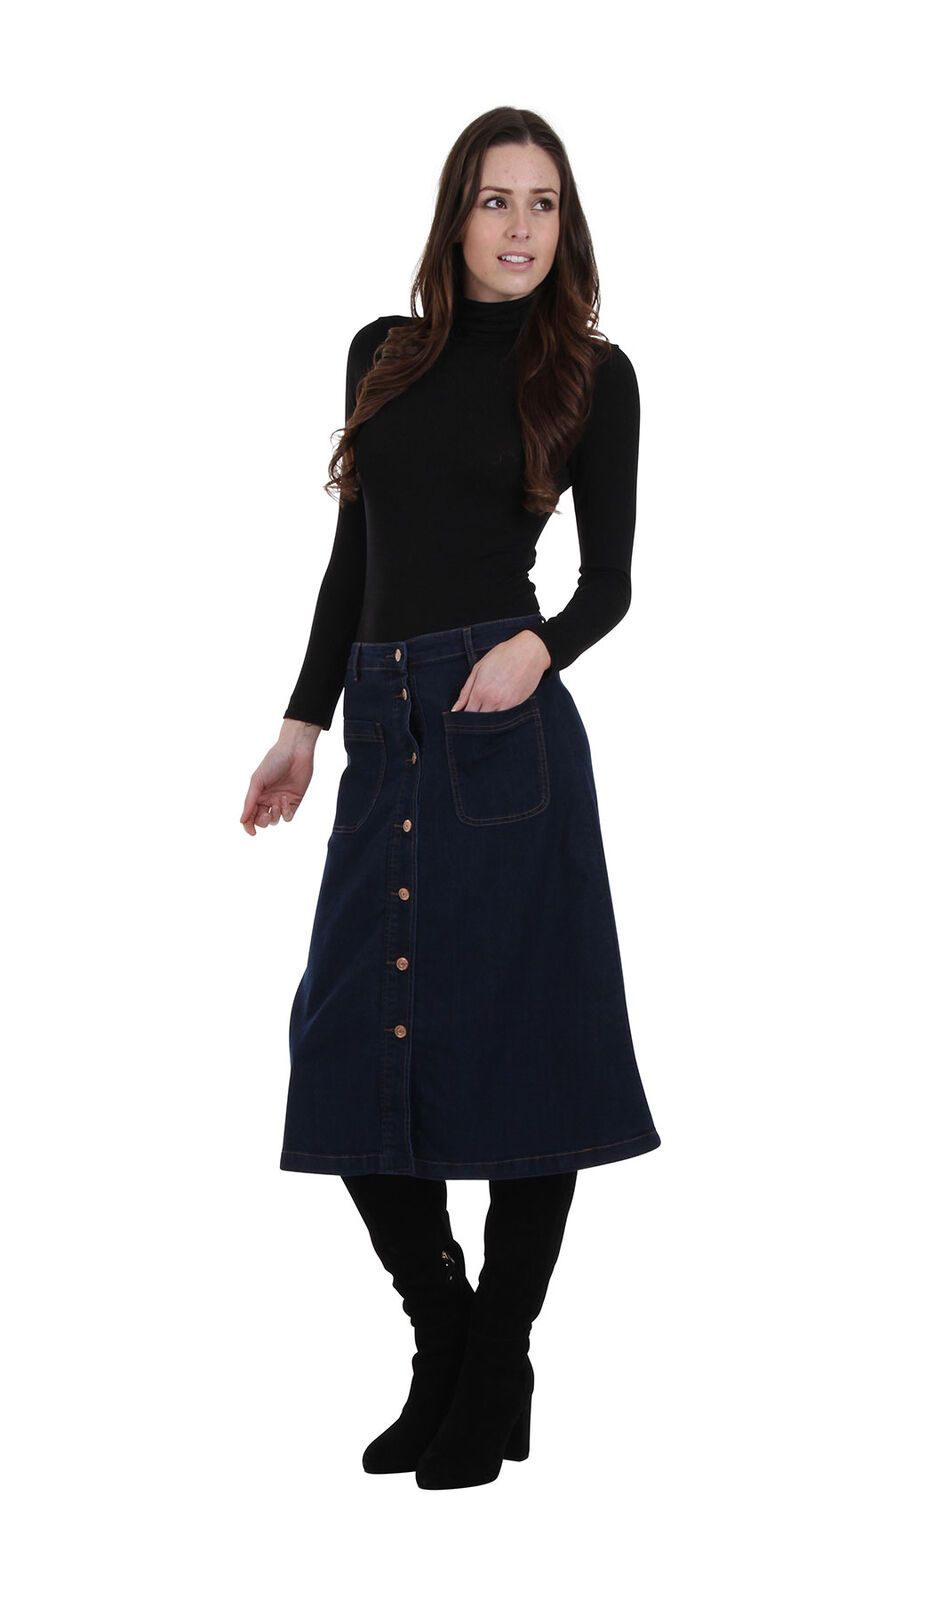 Angled frontal view leaning on right hip with hand in front-left patch pocket of dark denim button-front skirt.